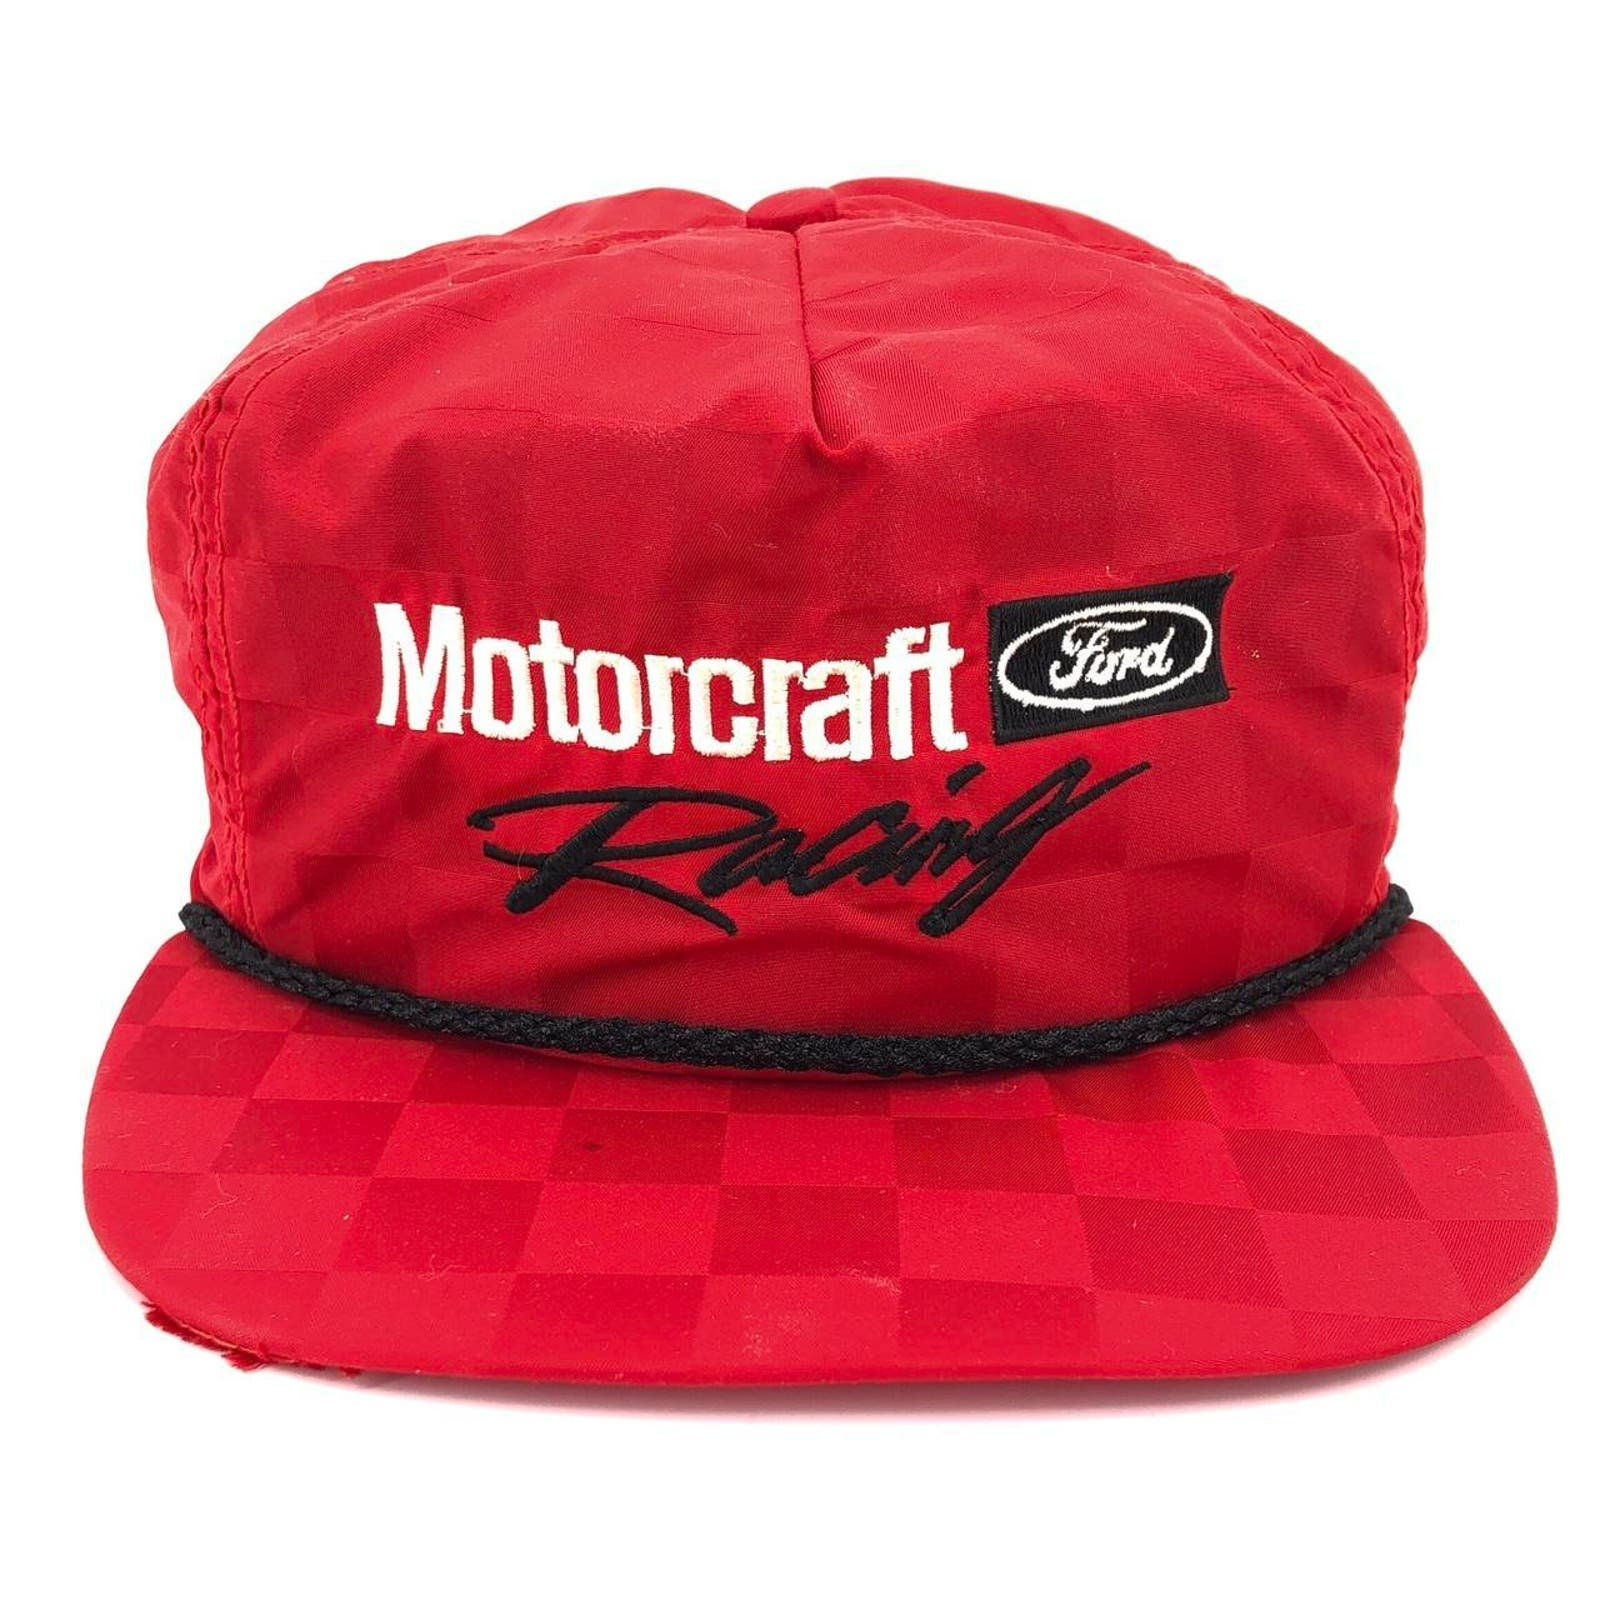 90s Ford Motorcraft Racing red checkered hat 1990s vintage gGD7nkZsW